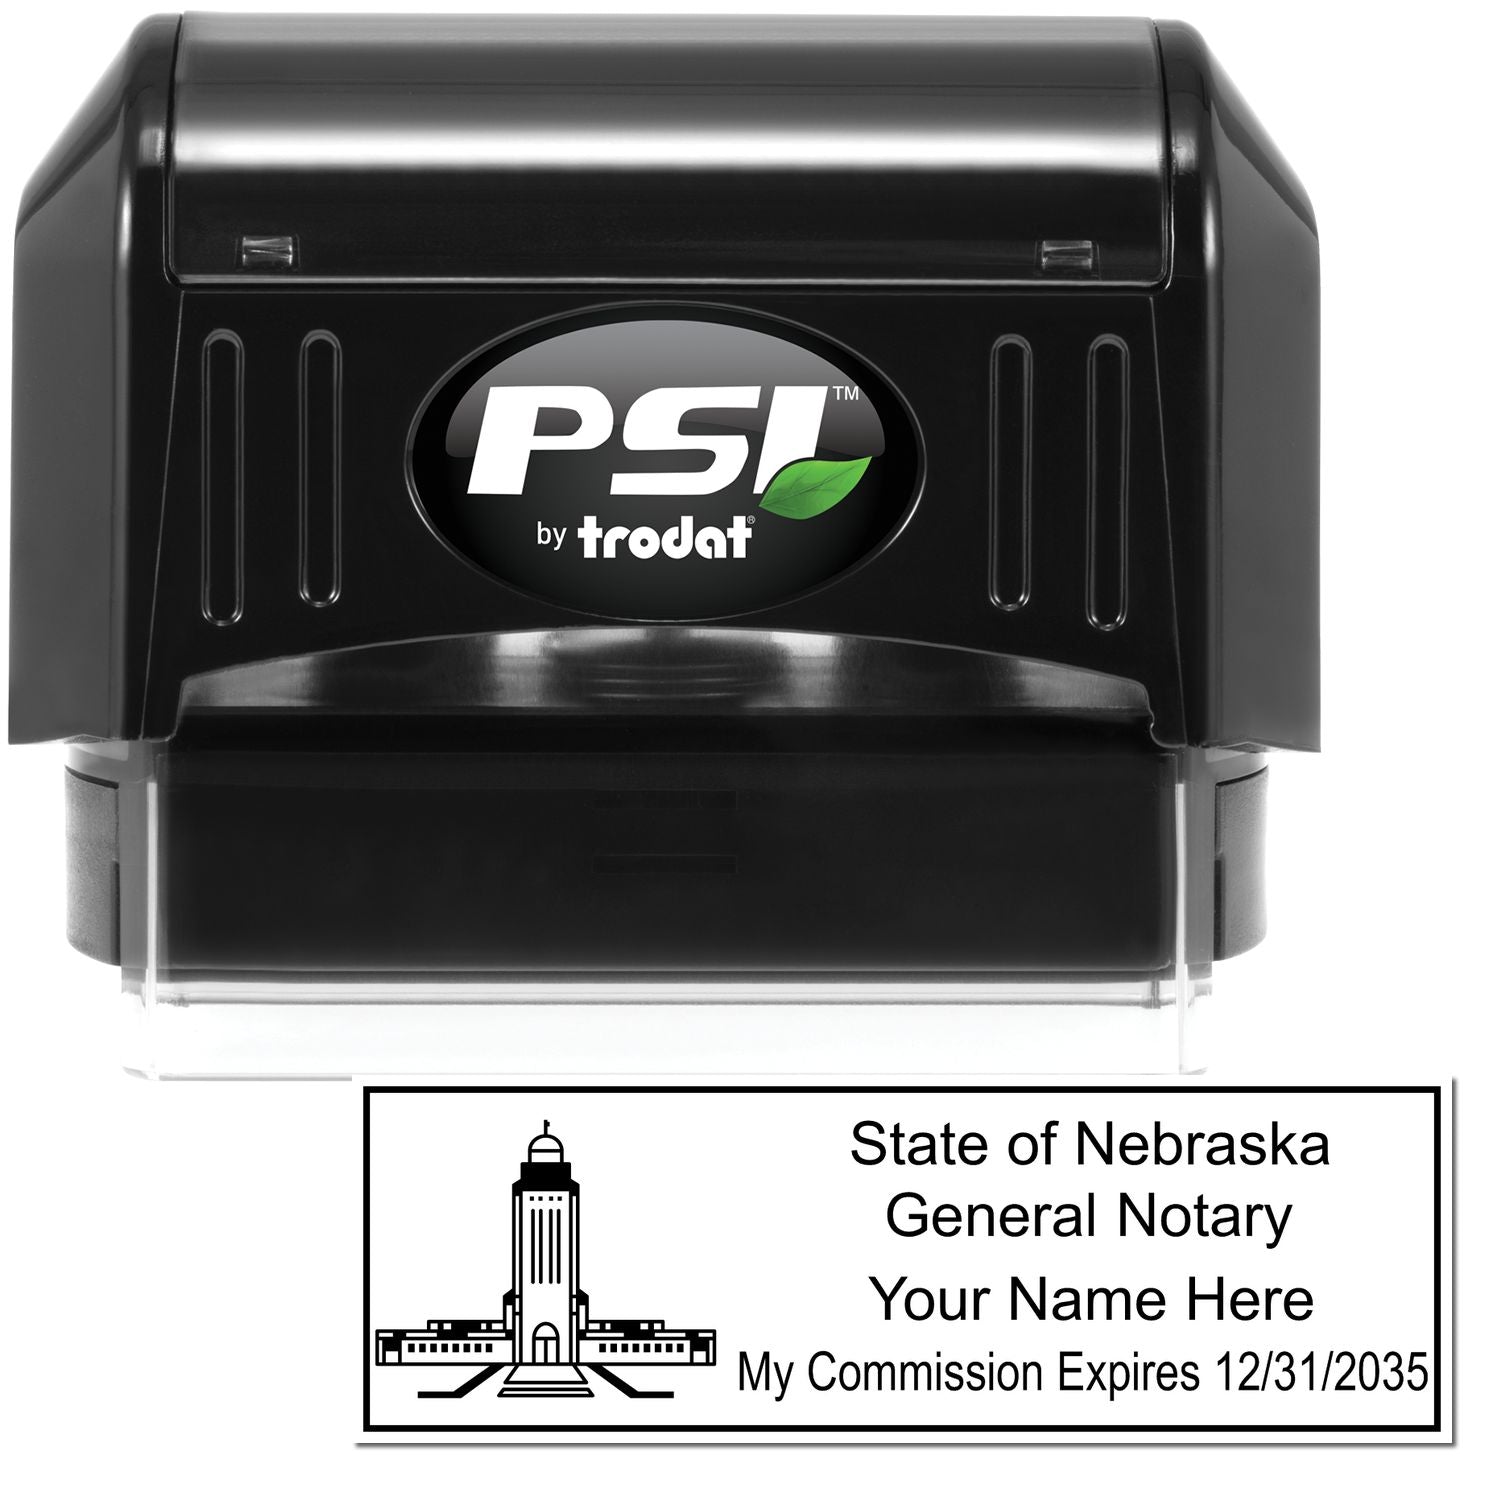 The main image for the PSI Nebraska Notary Stamp depicting a sample of the imprint and electronic files